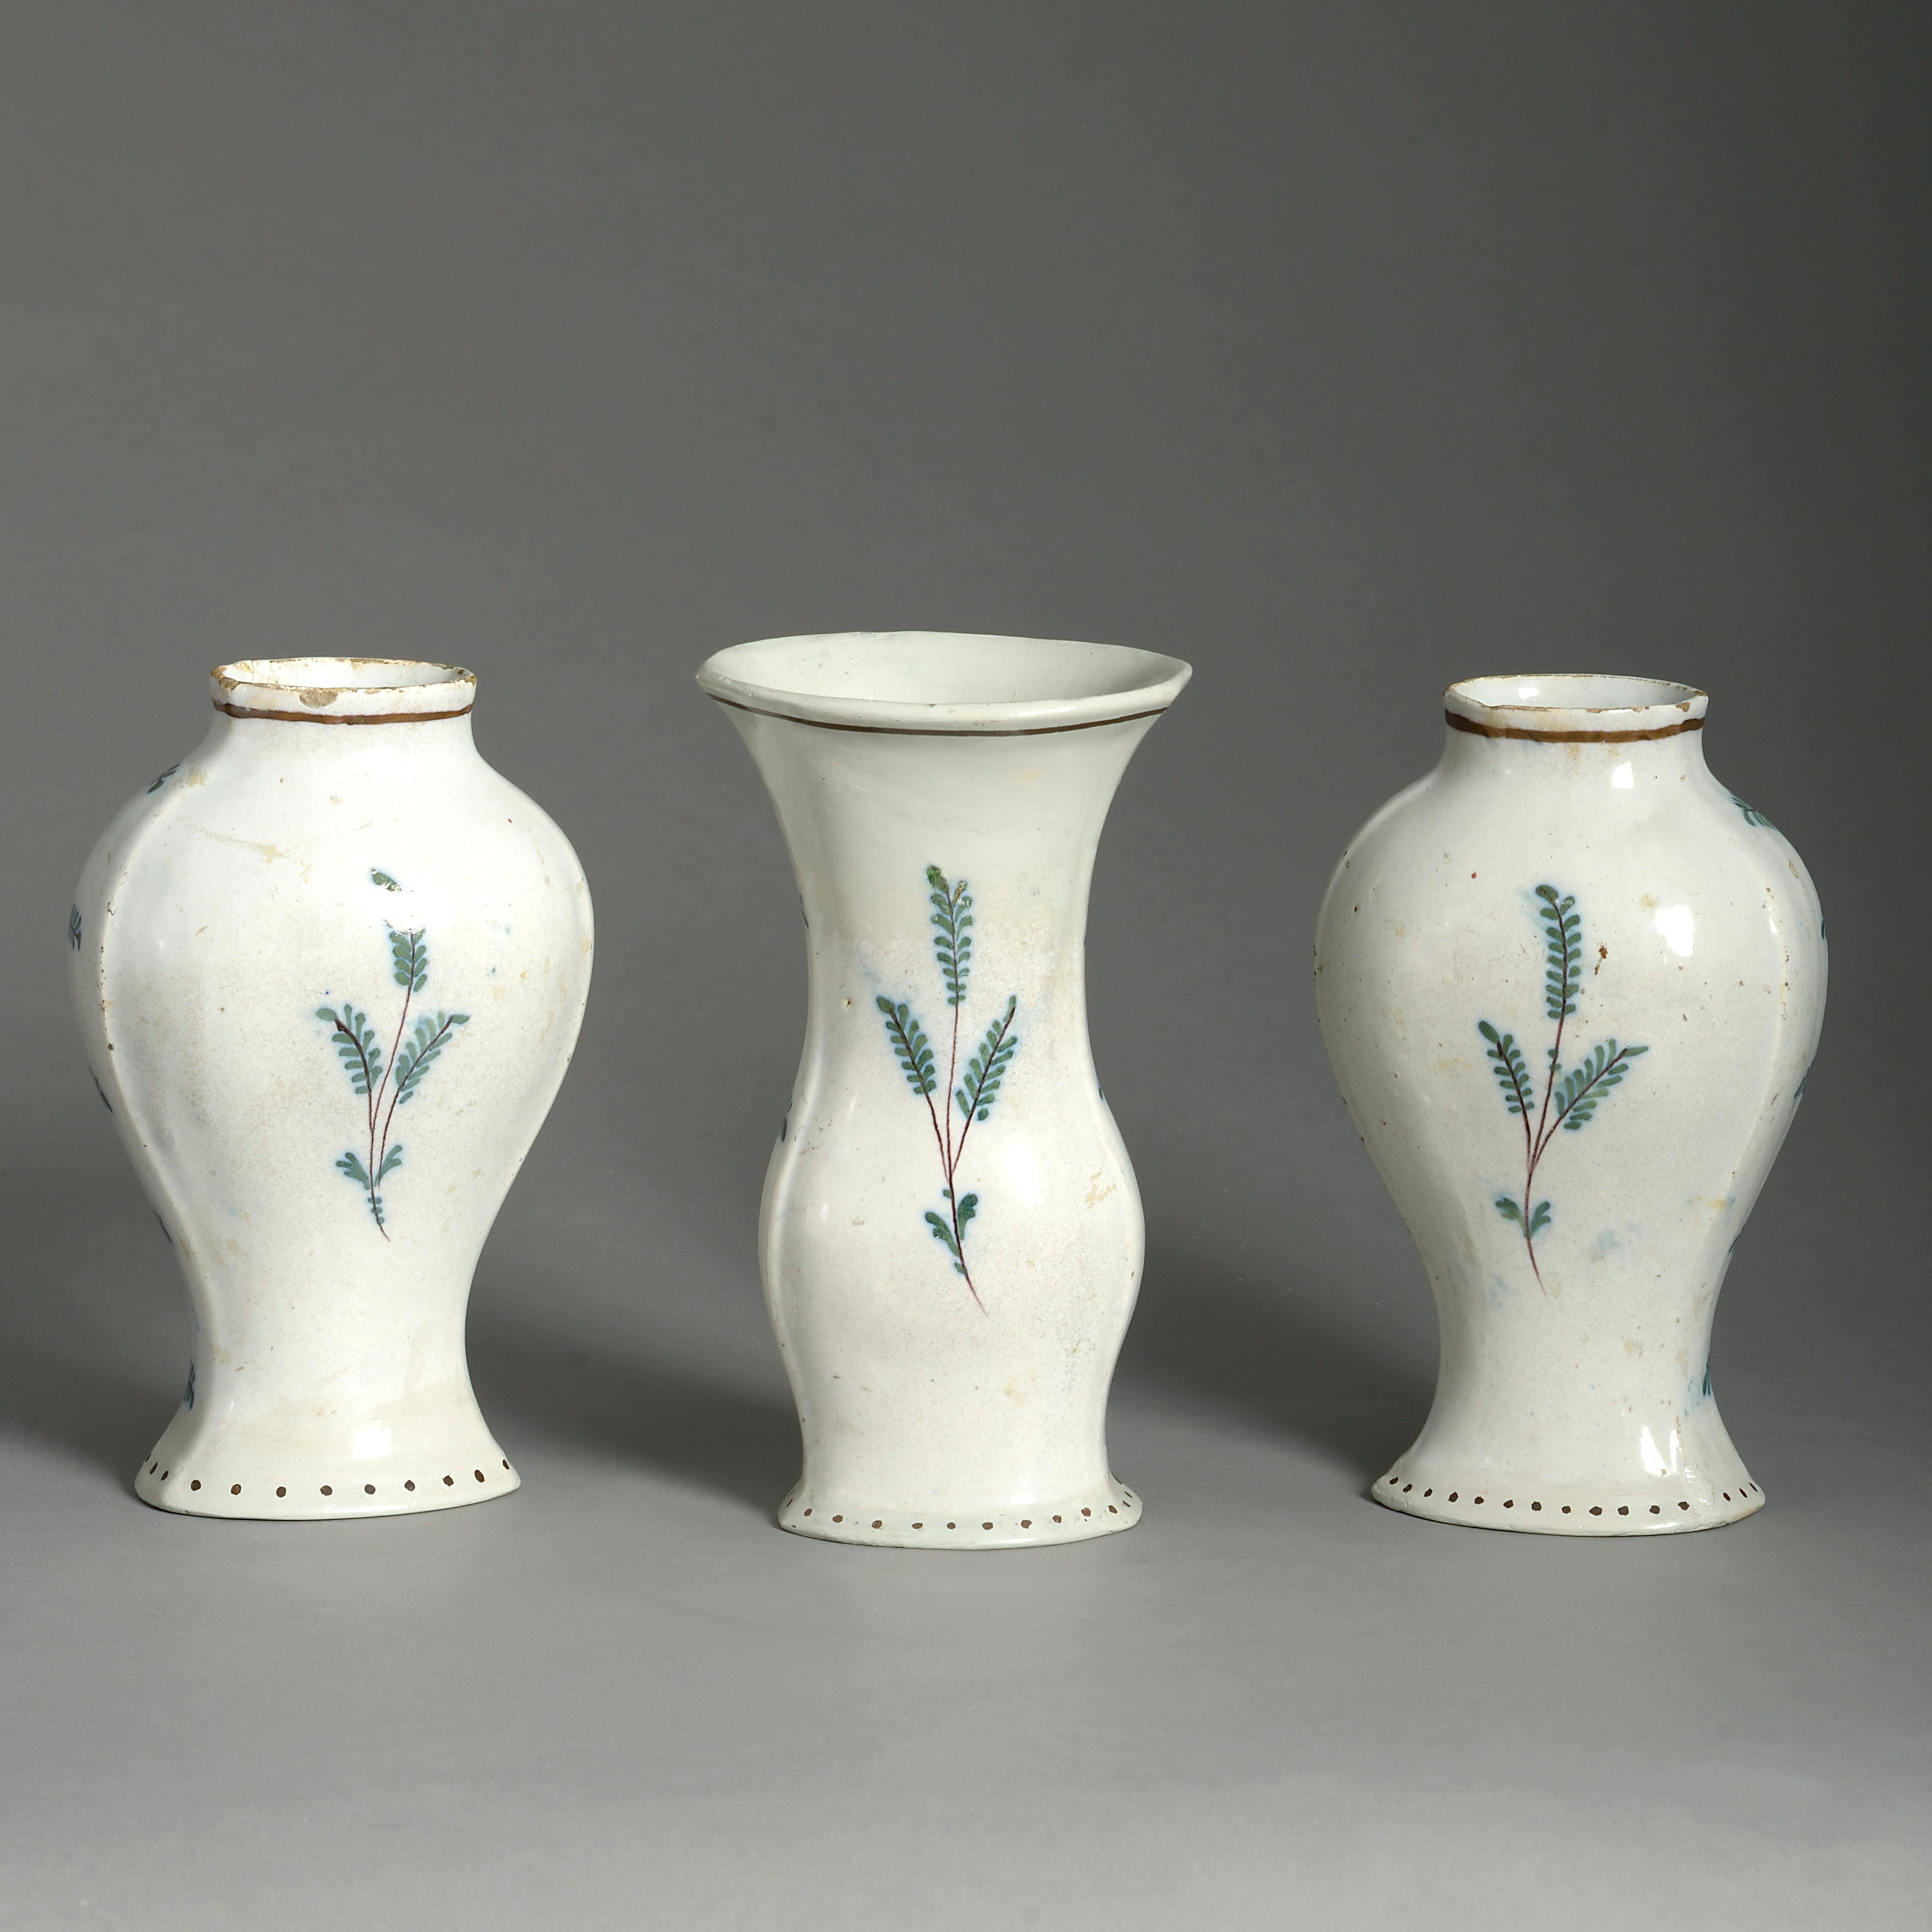 Three late 18th century polychrome glazed Delft pottery vases, two of baluster form, one of trumpet form, each with a central cartouche depicting a landscape upon a yellow fish scale ground.